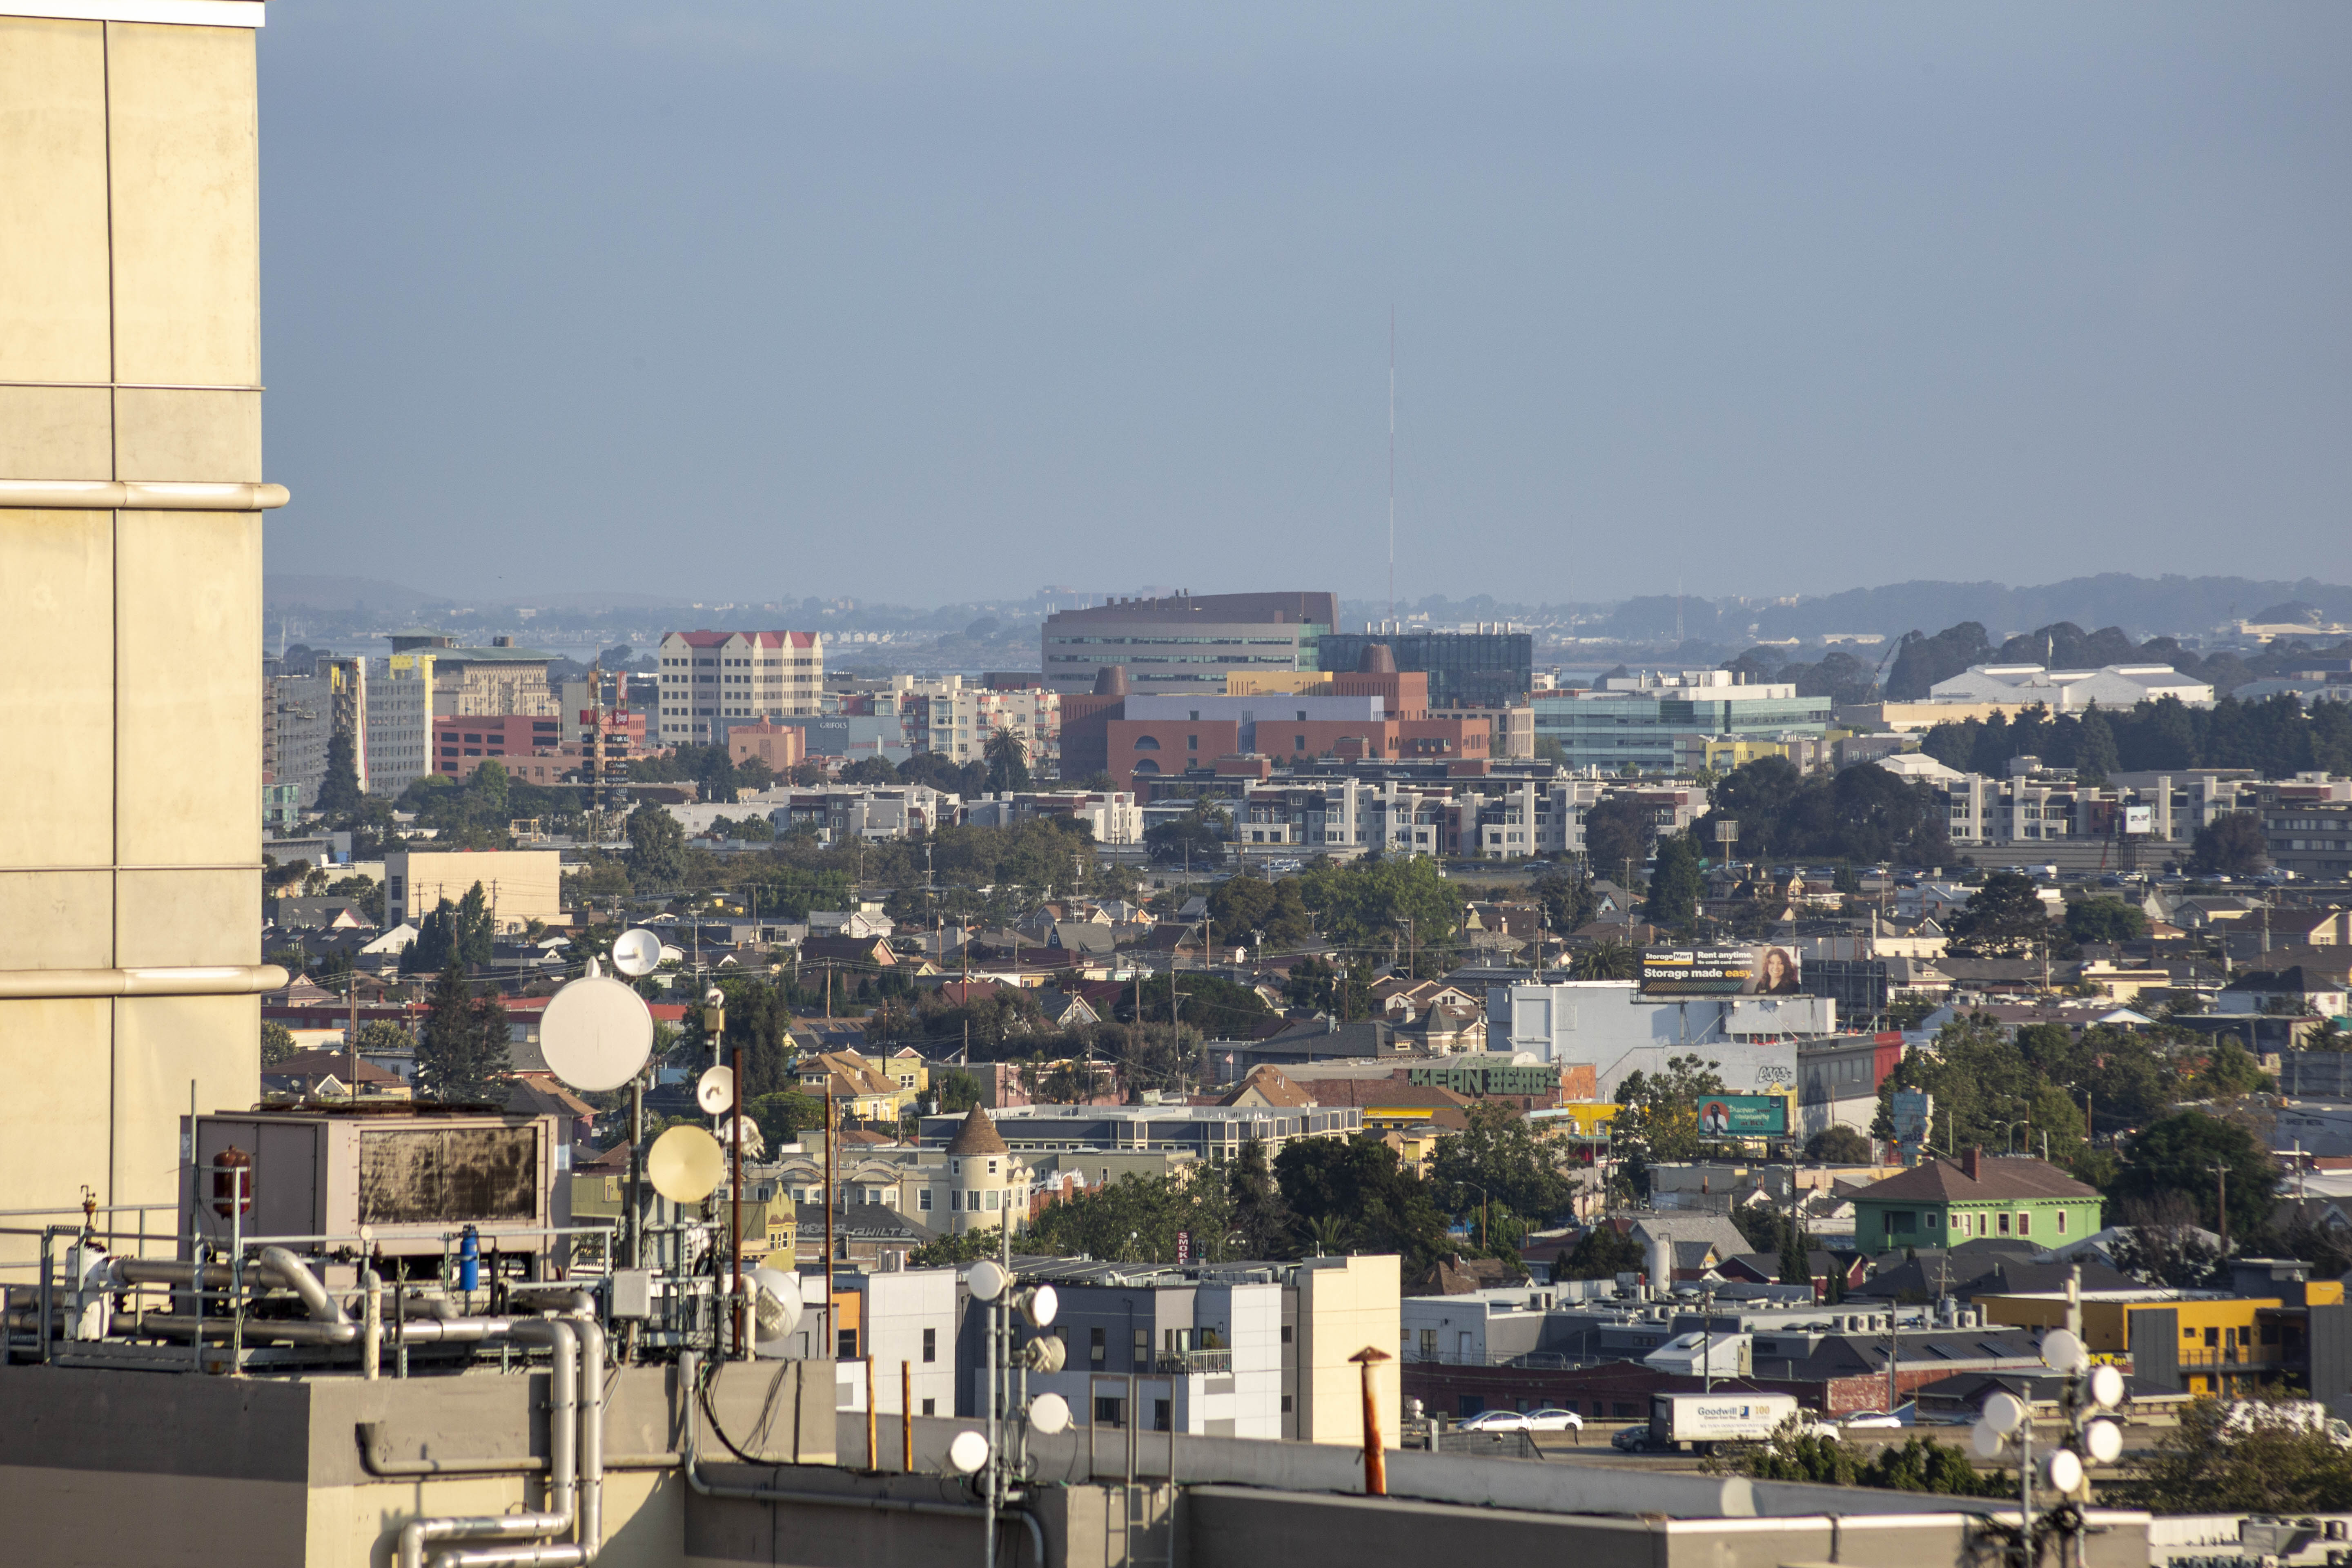 Emeryville skyline seen from 1510 Webster Street, image by Andrew Campbell Nelson